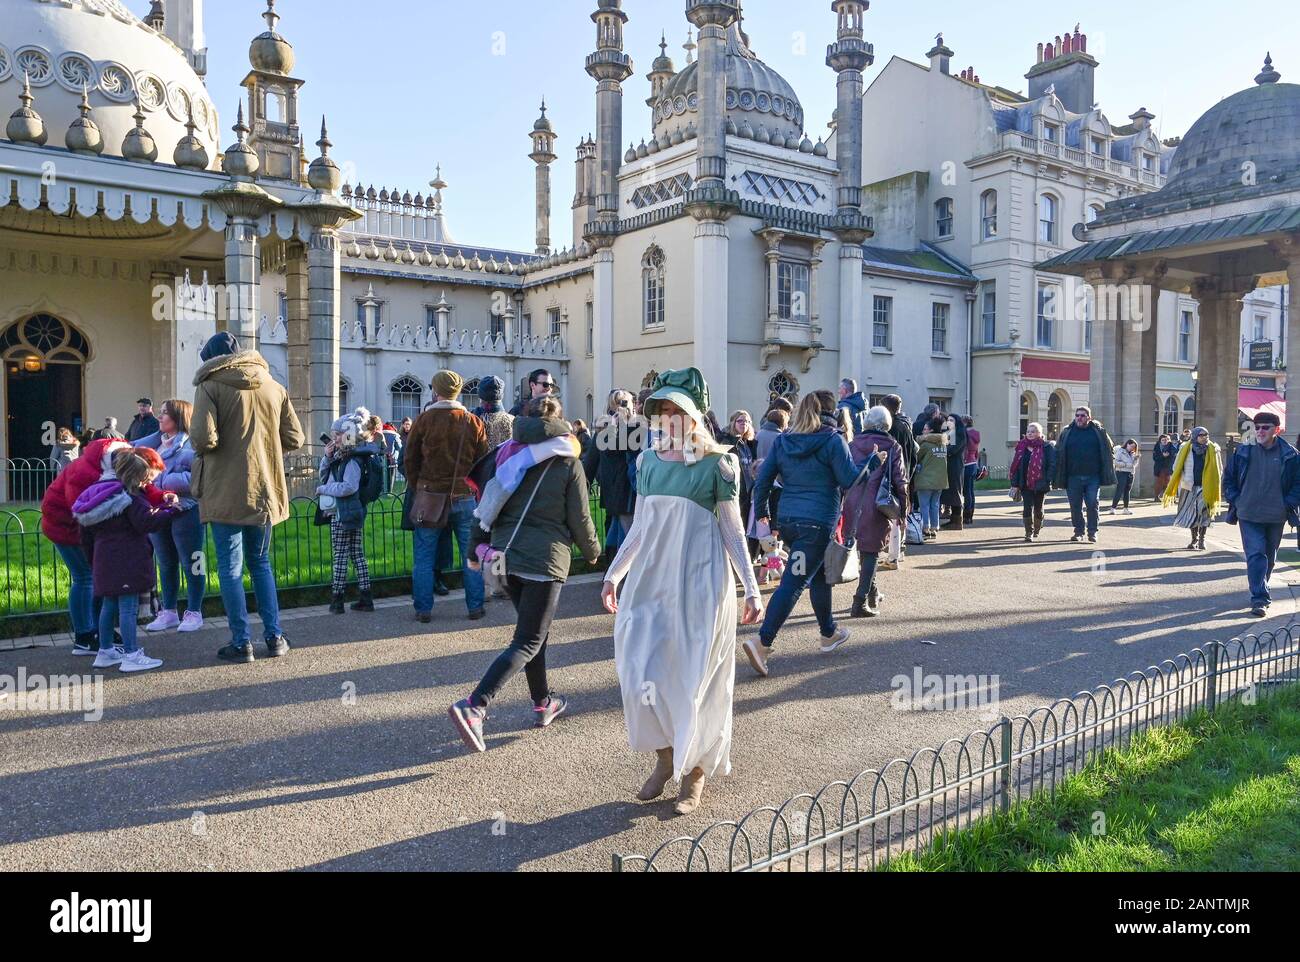 Brighton UK 19th January 2020 - Regency characters meet and greet the crowds as hundreds queue up on the free visit day at Brighton Royal Pavilion . To celebrate the purchase of the Royal Pavilion by Brighton in 1850 admission charges are waived one day a year : Credit Simon Dack / Alamy Live News Stock Photo